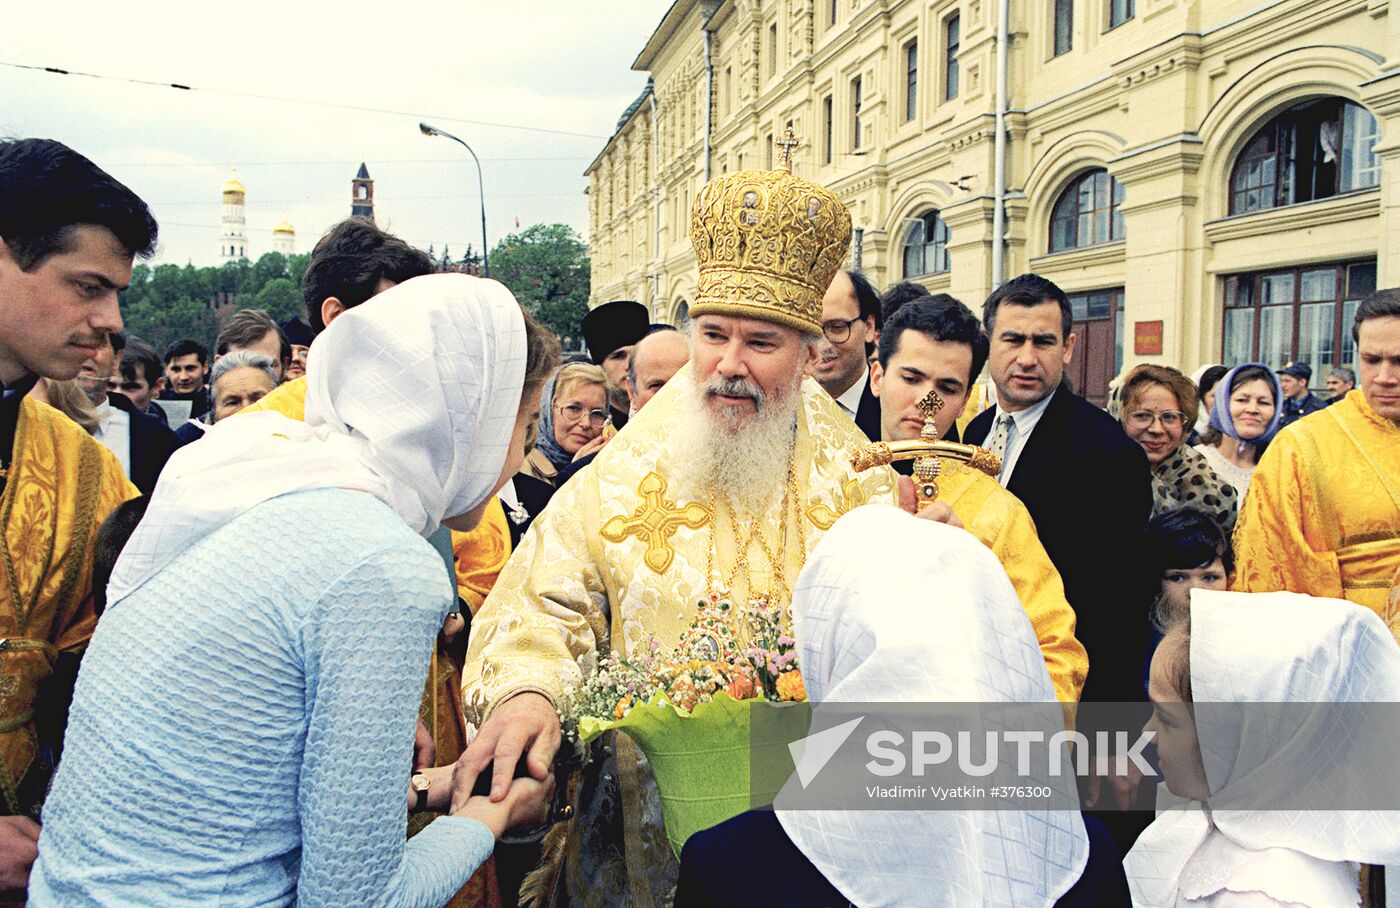 Patriarch Alexeiy II's blessing